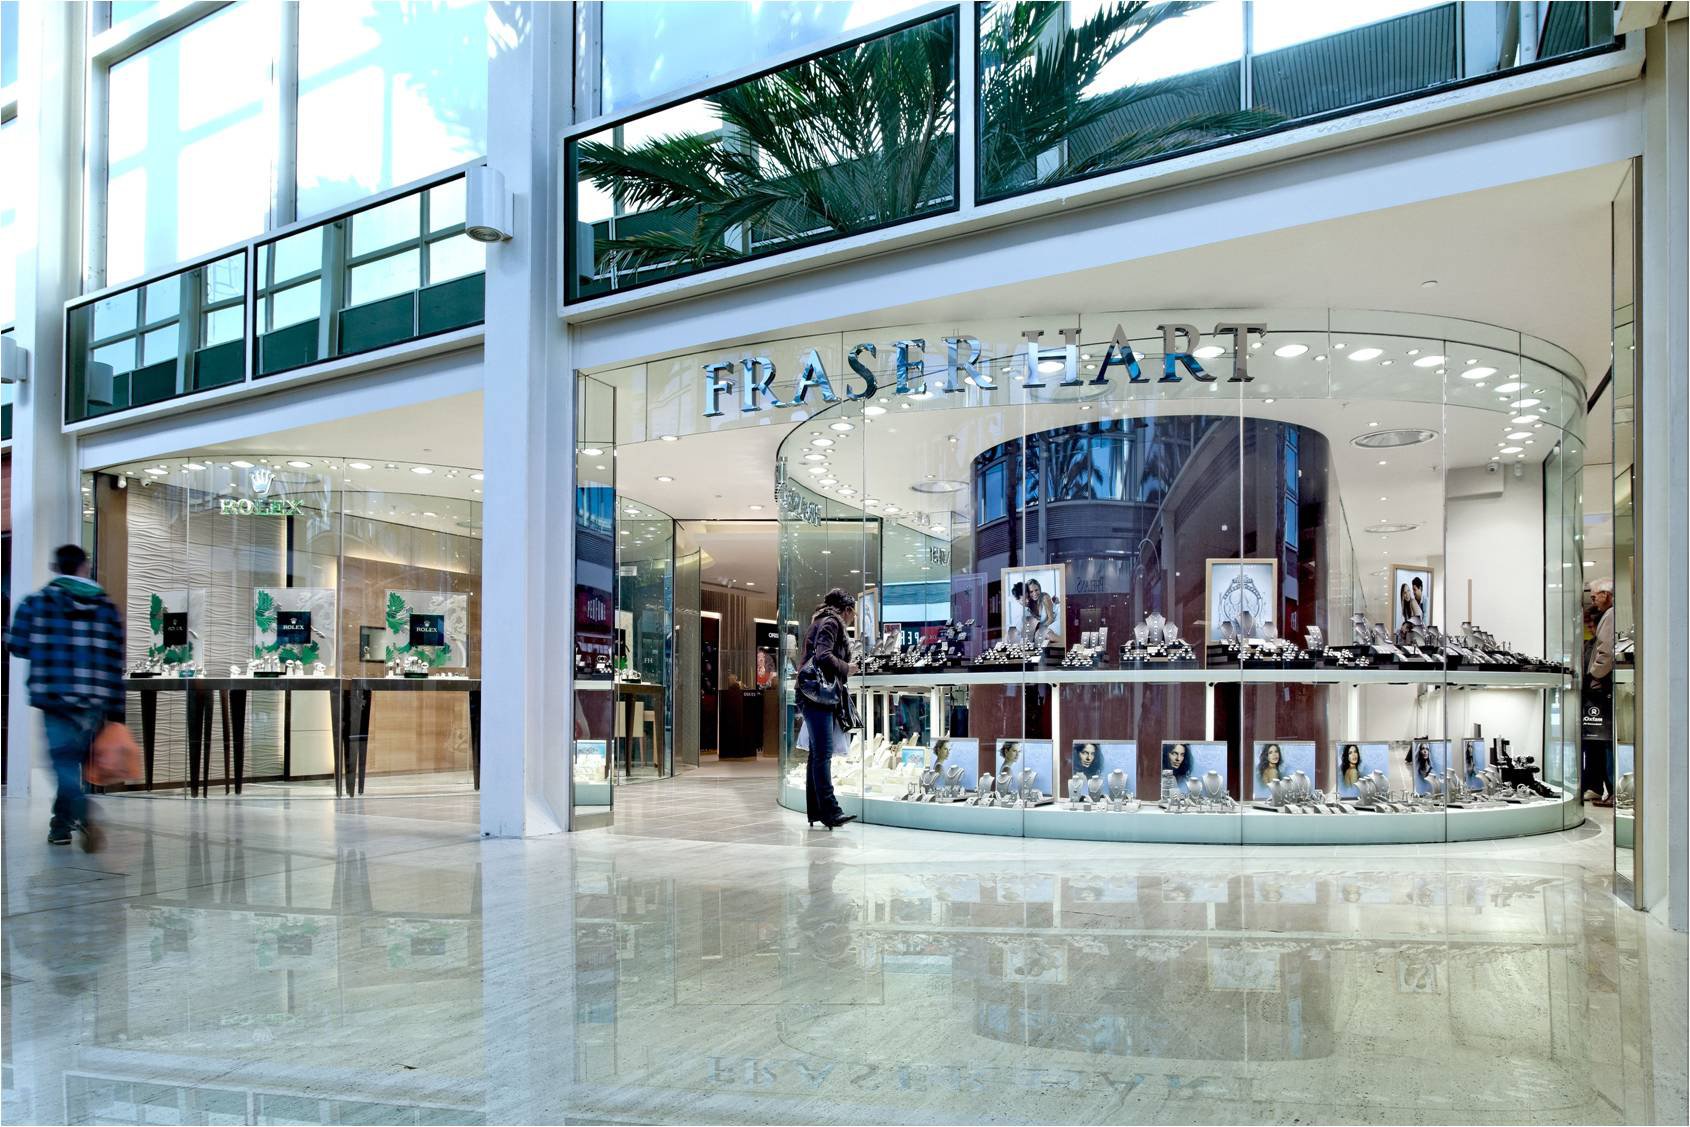 Fraser hart stores like this one in milton keynes mk centre, draw customers into the store and give more space to fewer watch and jewellery brands.